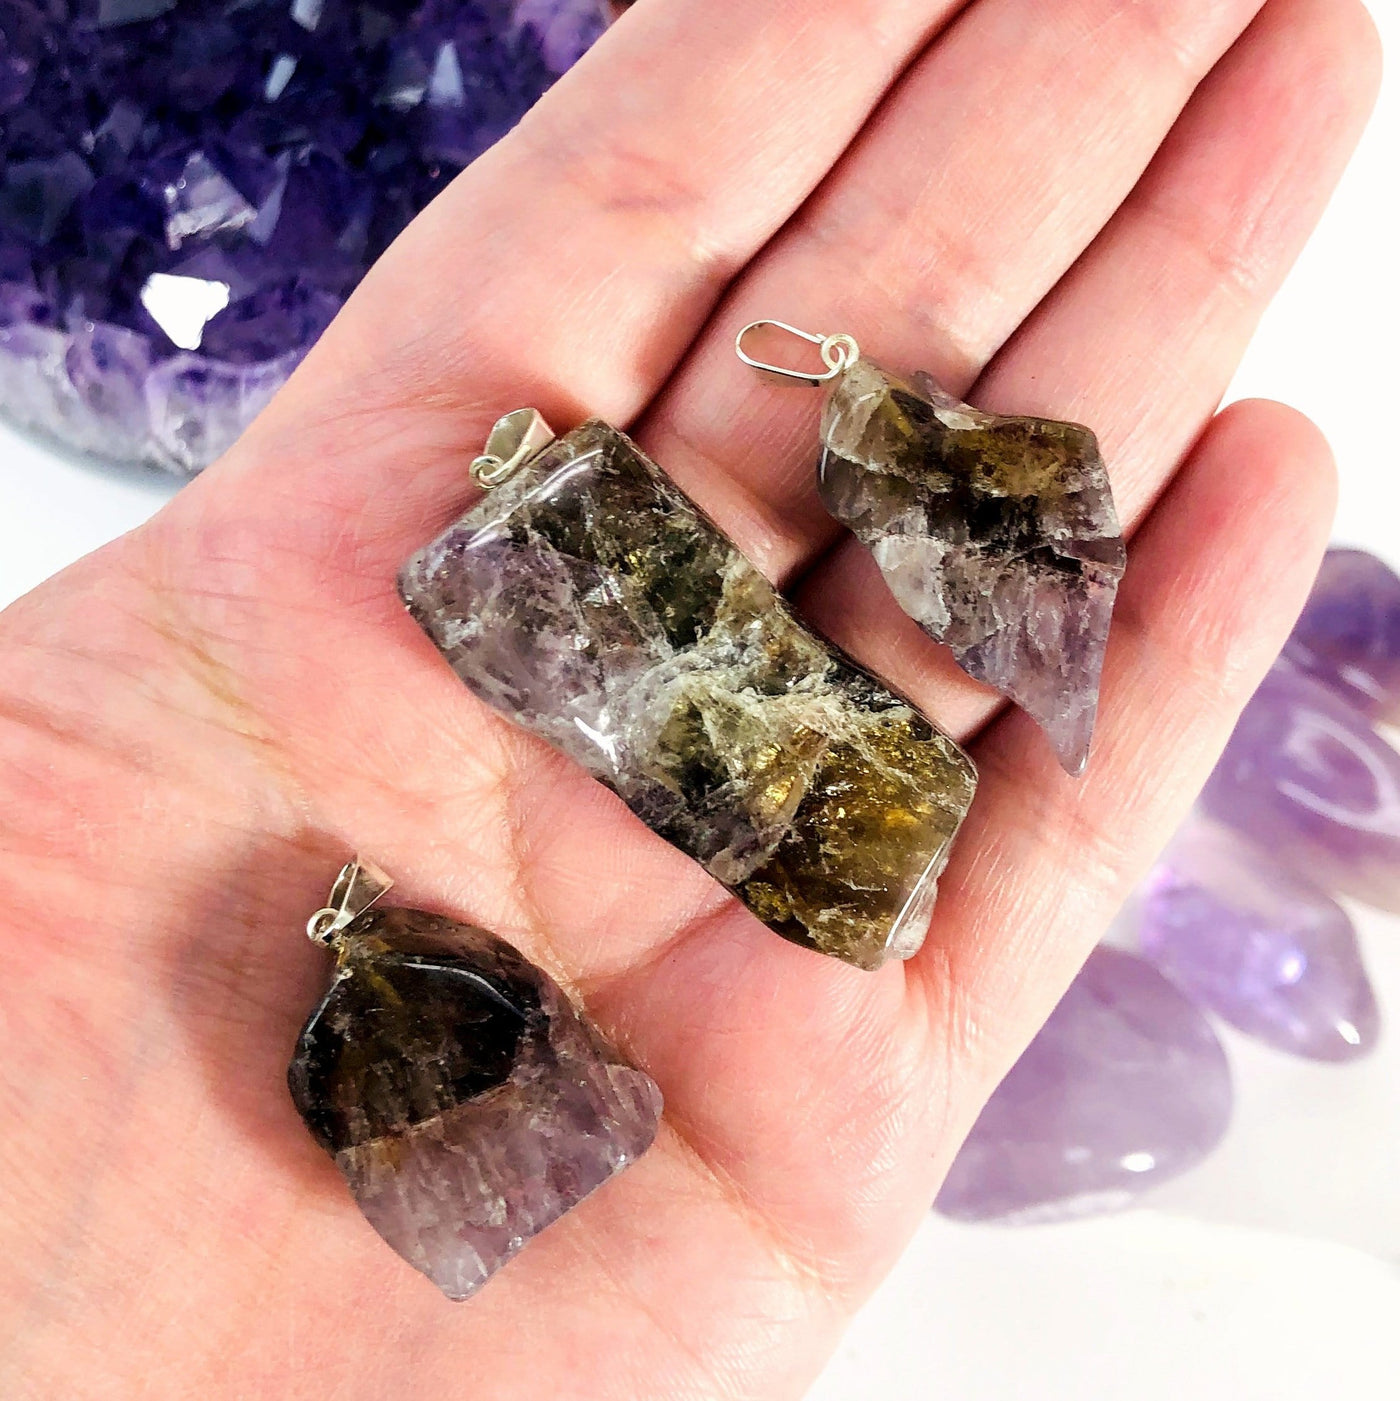 three seven minerals in one stone free form slab pendants in hand for size reference